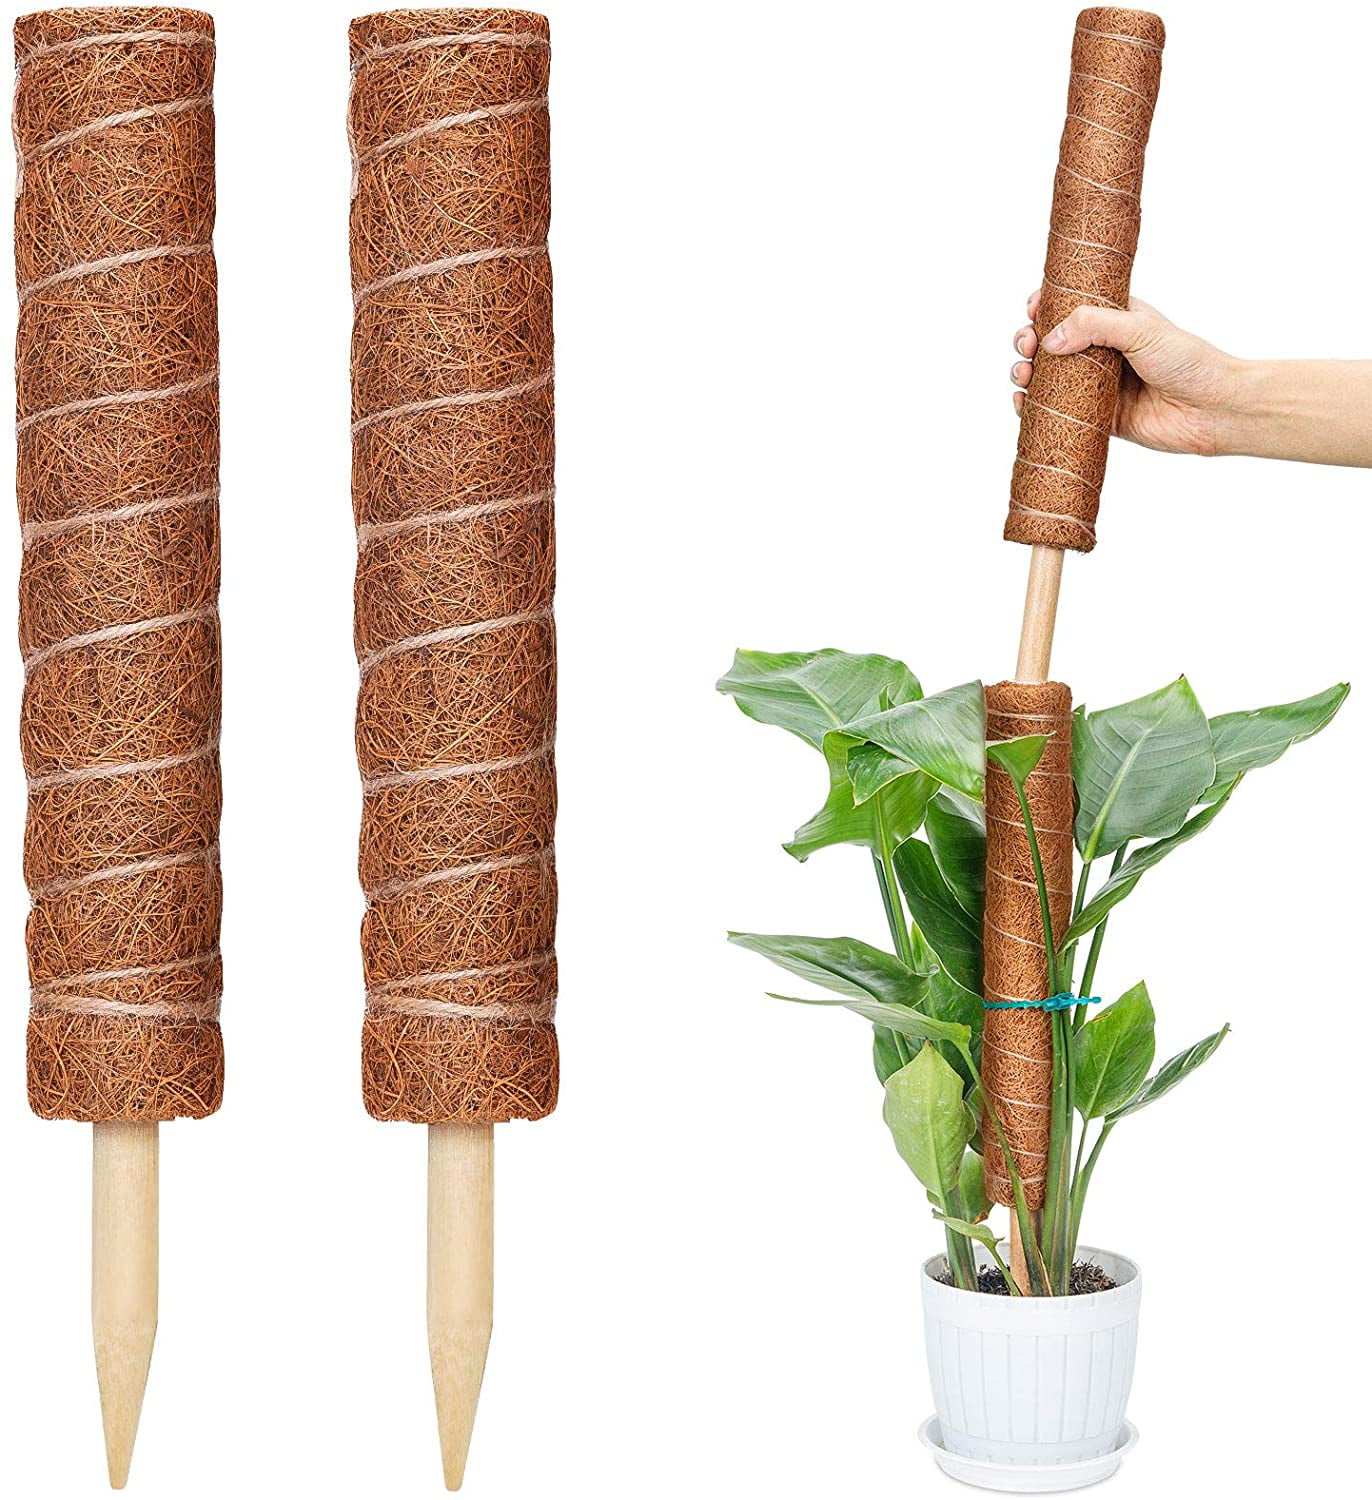 Cosumina Moss Pole,4 Pcs 16 Inches Moss Plant Poles for Indoor Plants to Grow Upwards, Totem Pole Plant Support, Moss Pole for Potted Plants, Coir